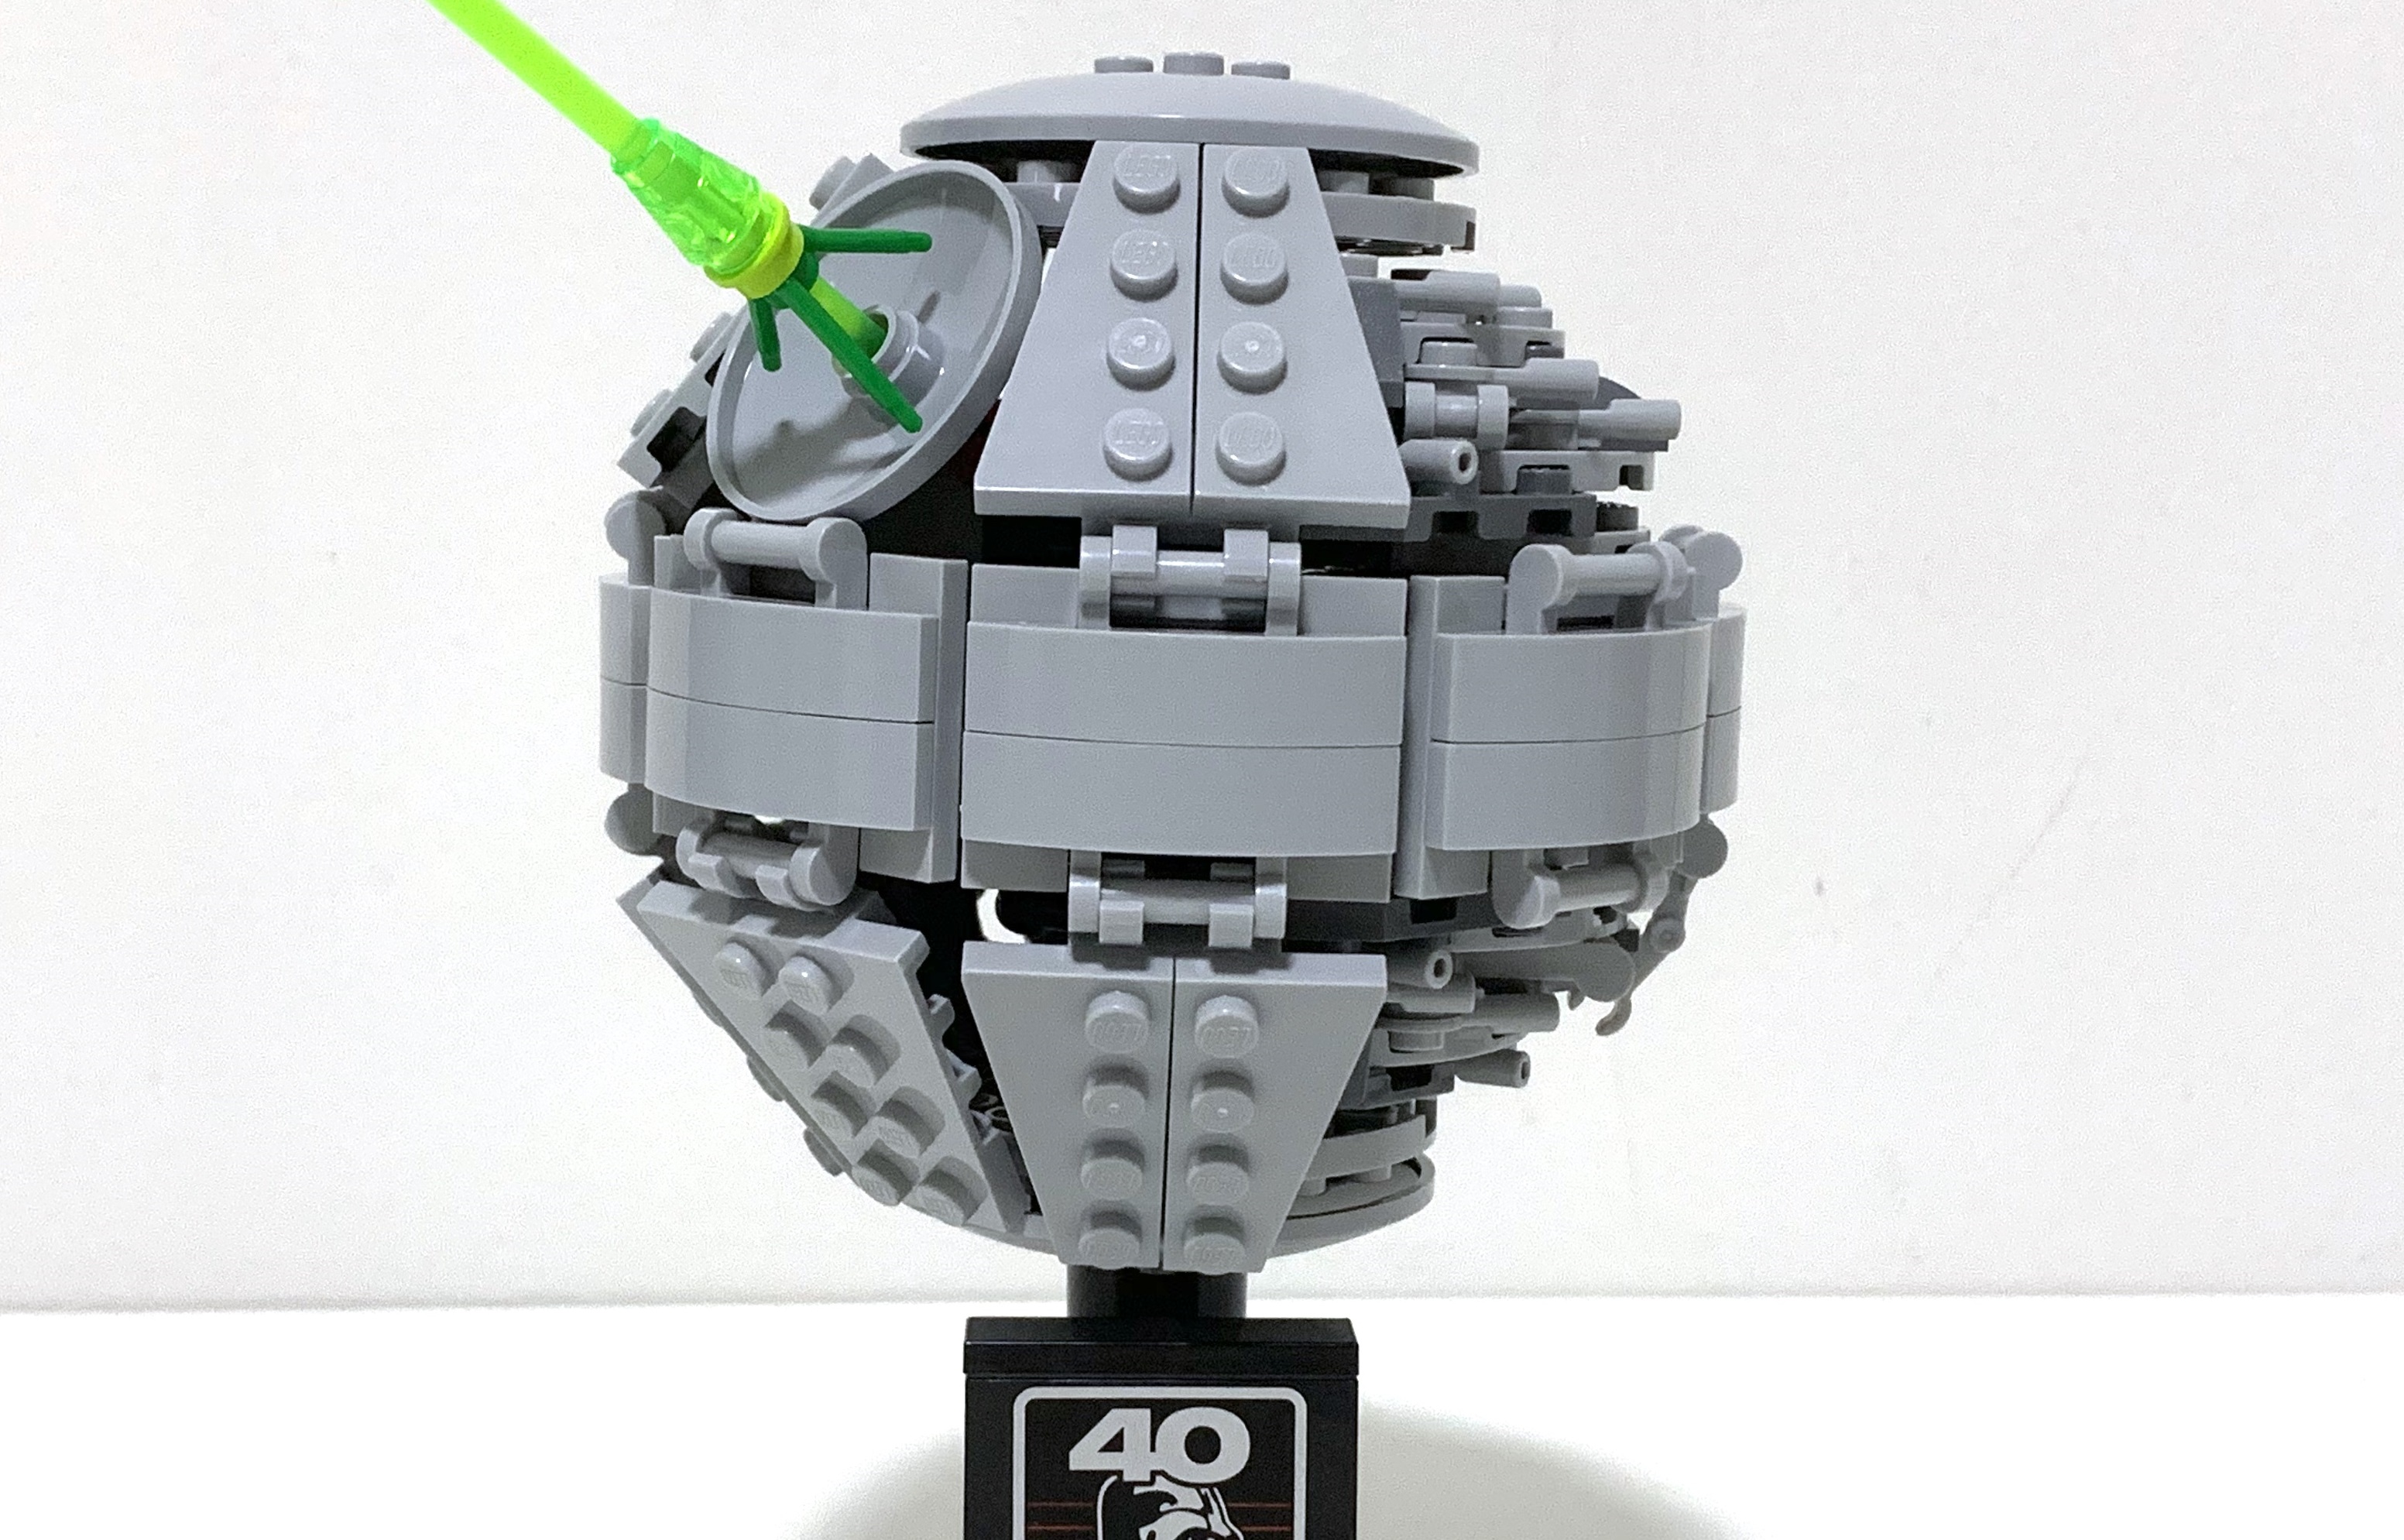 tone kæmpe Site line Review: LEGO 40591 Death Star II (May 4th GWP) - Jay's Brick Blog